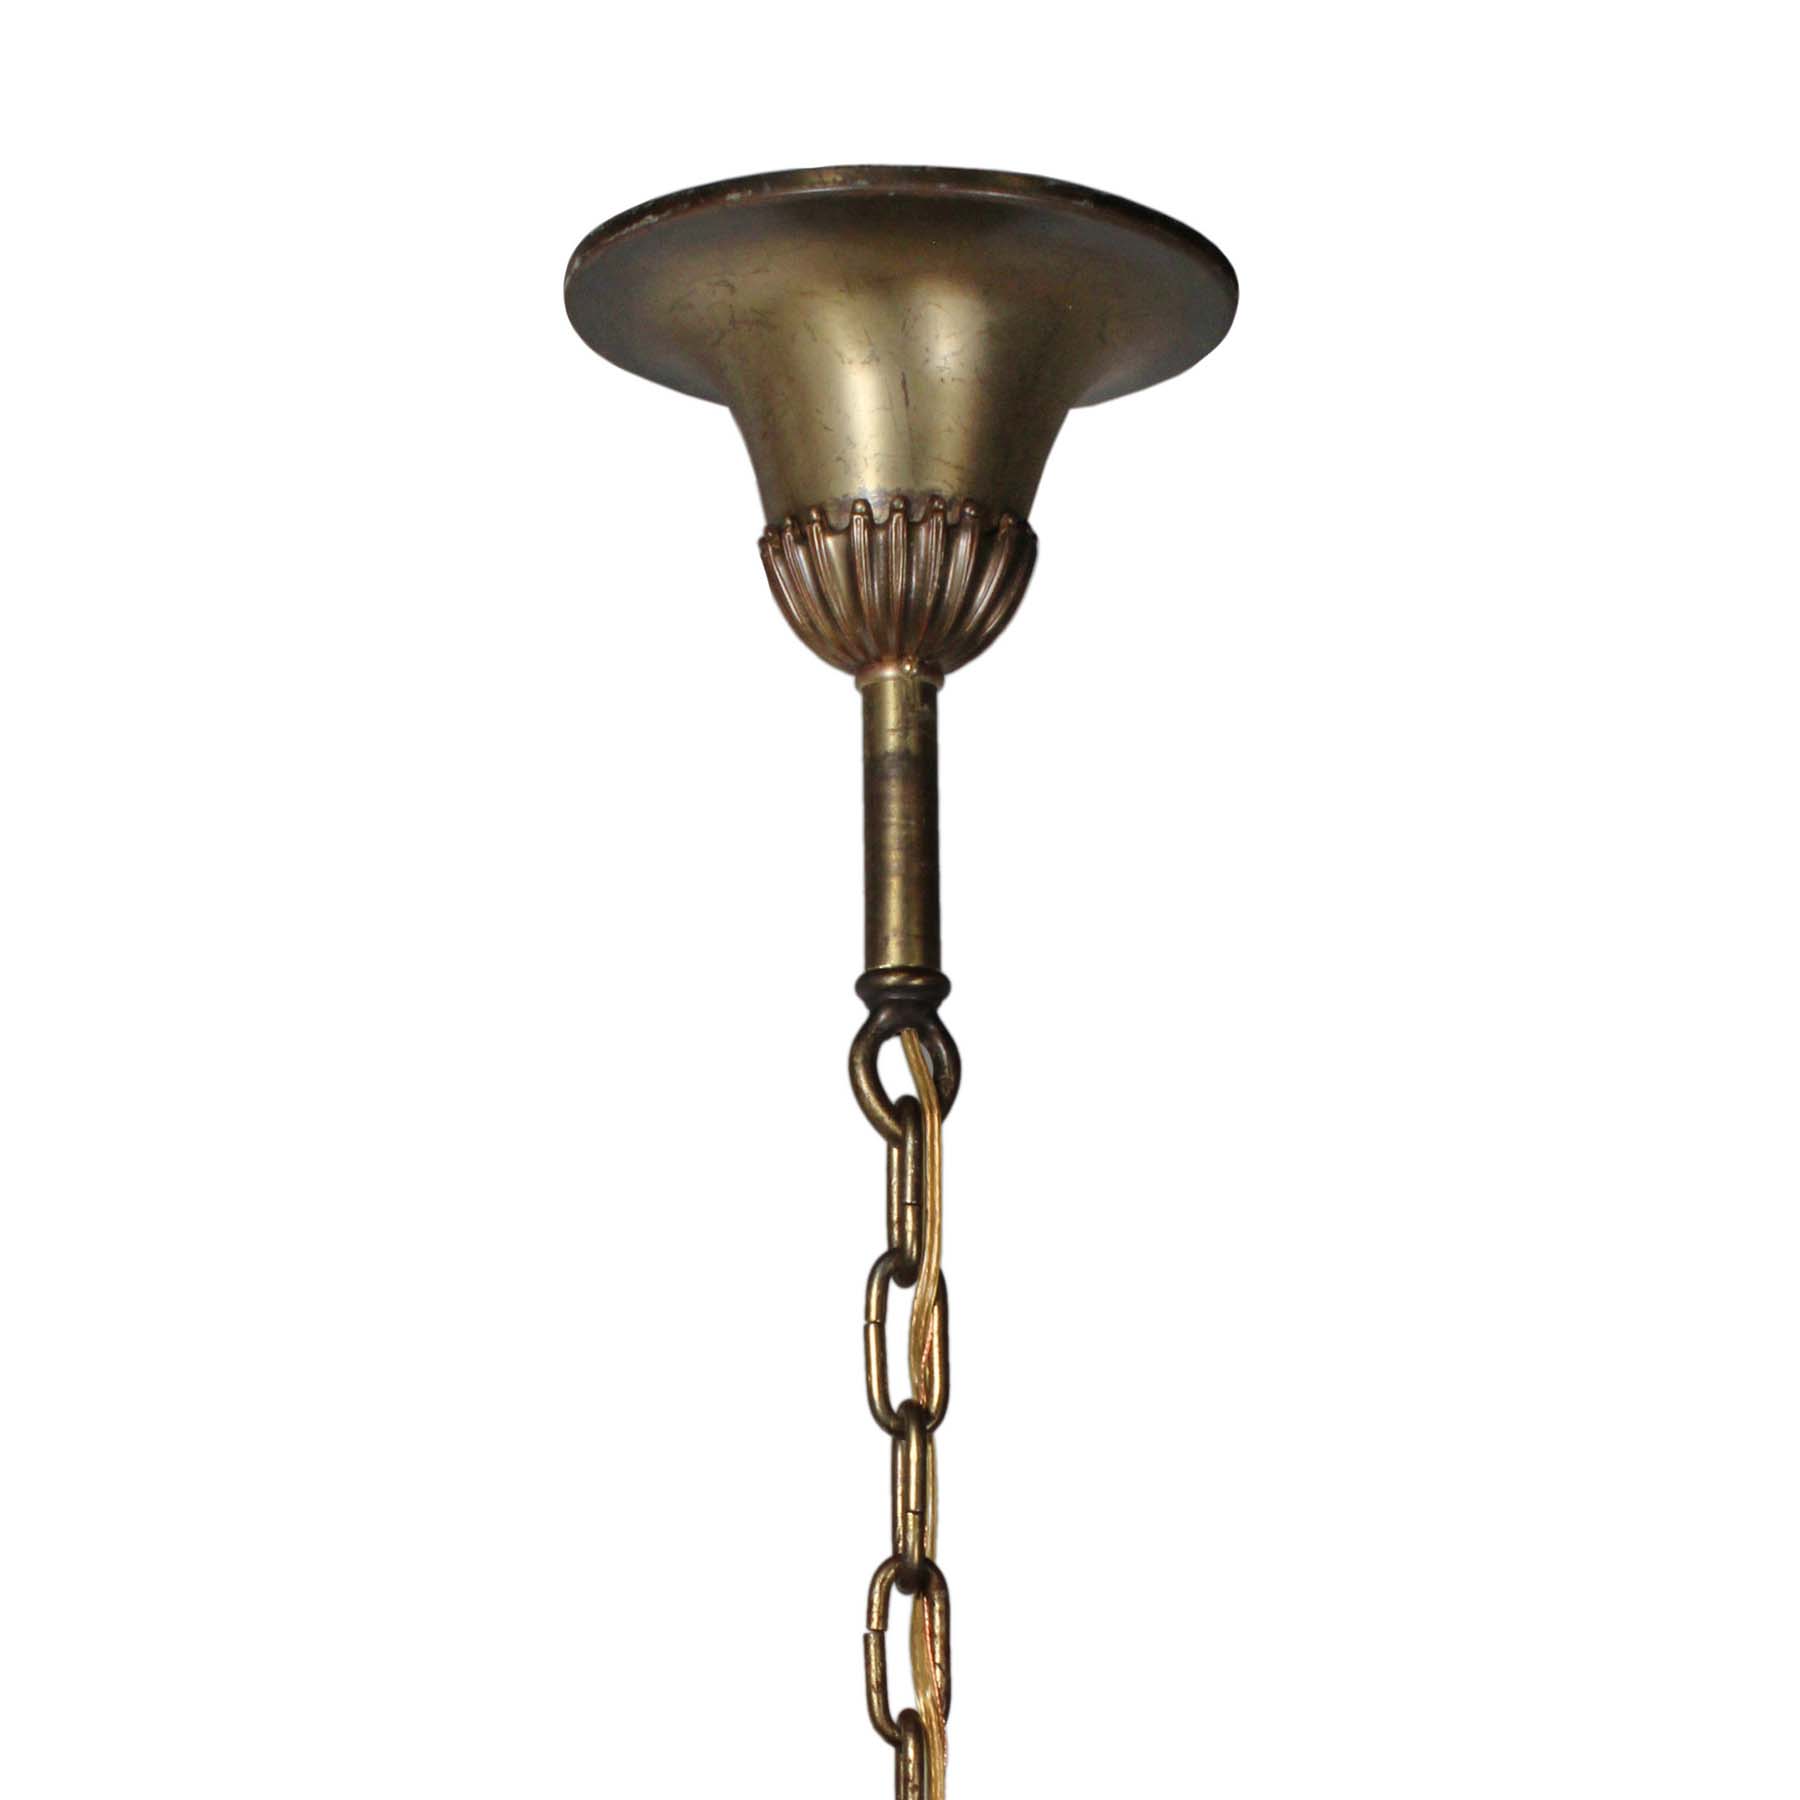 SOLD Substantial Antique Brass Three-Light Lantern Chandelier, Early 1900s-69665